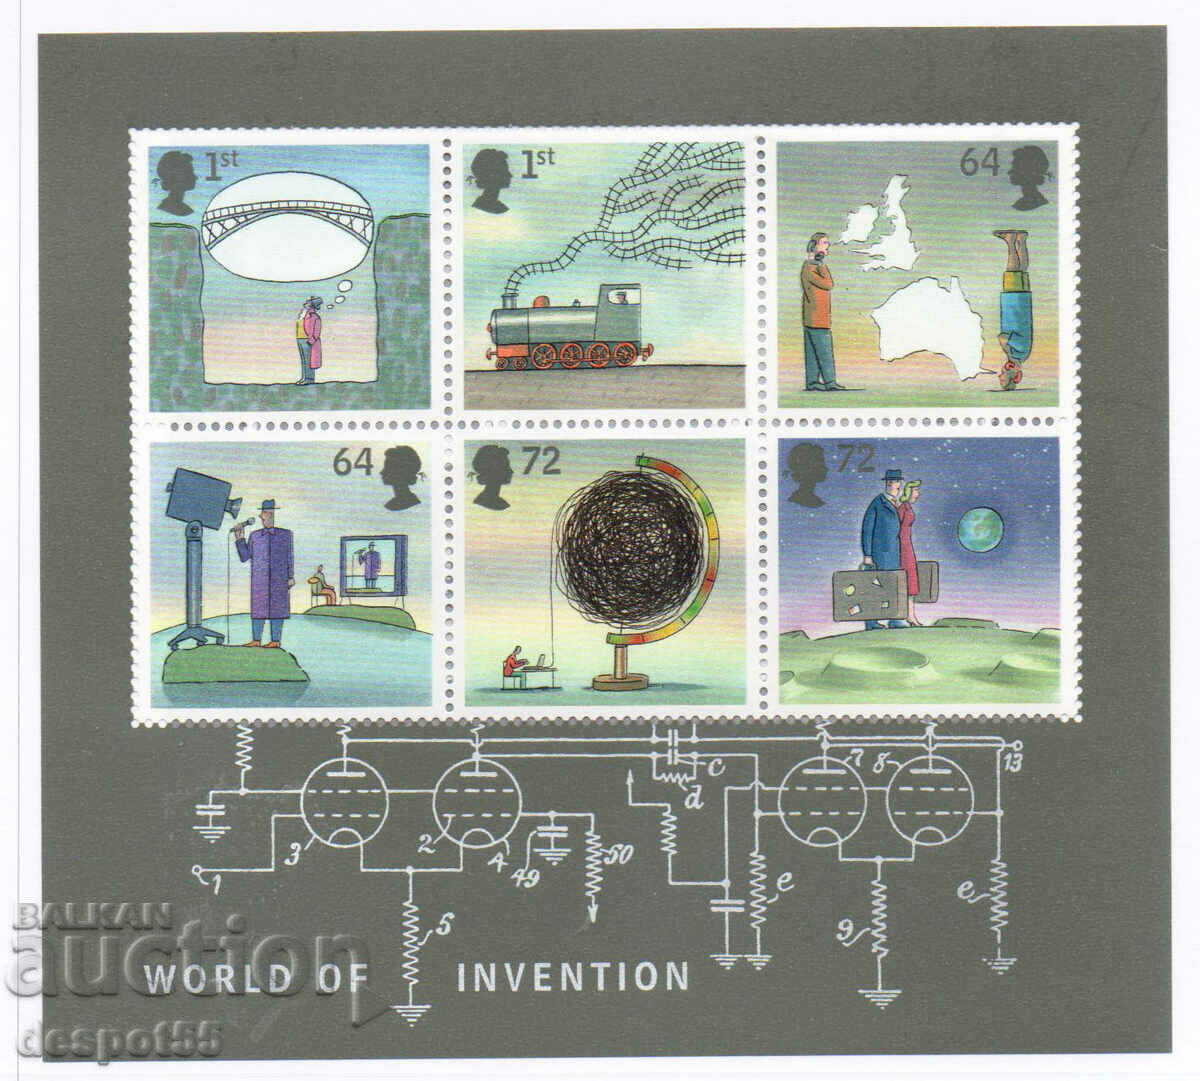 2007. Great Britain. The world of inventions. Block.